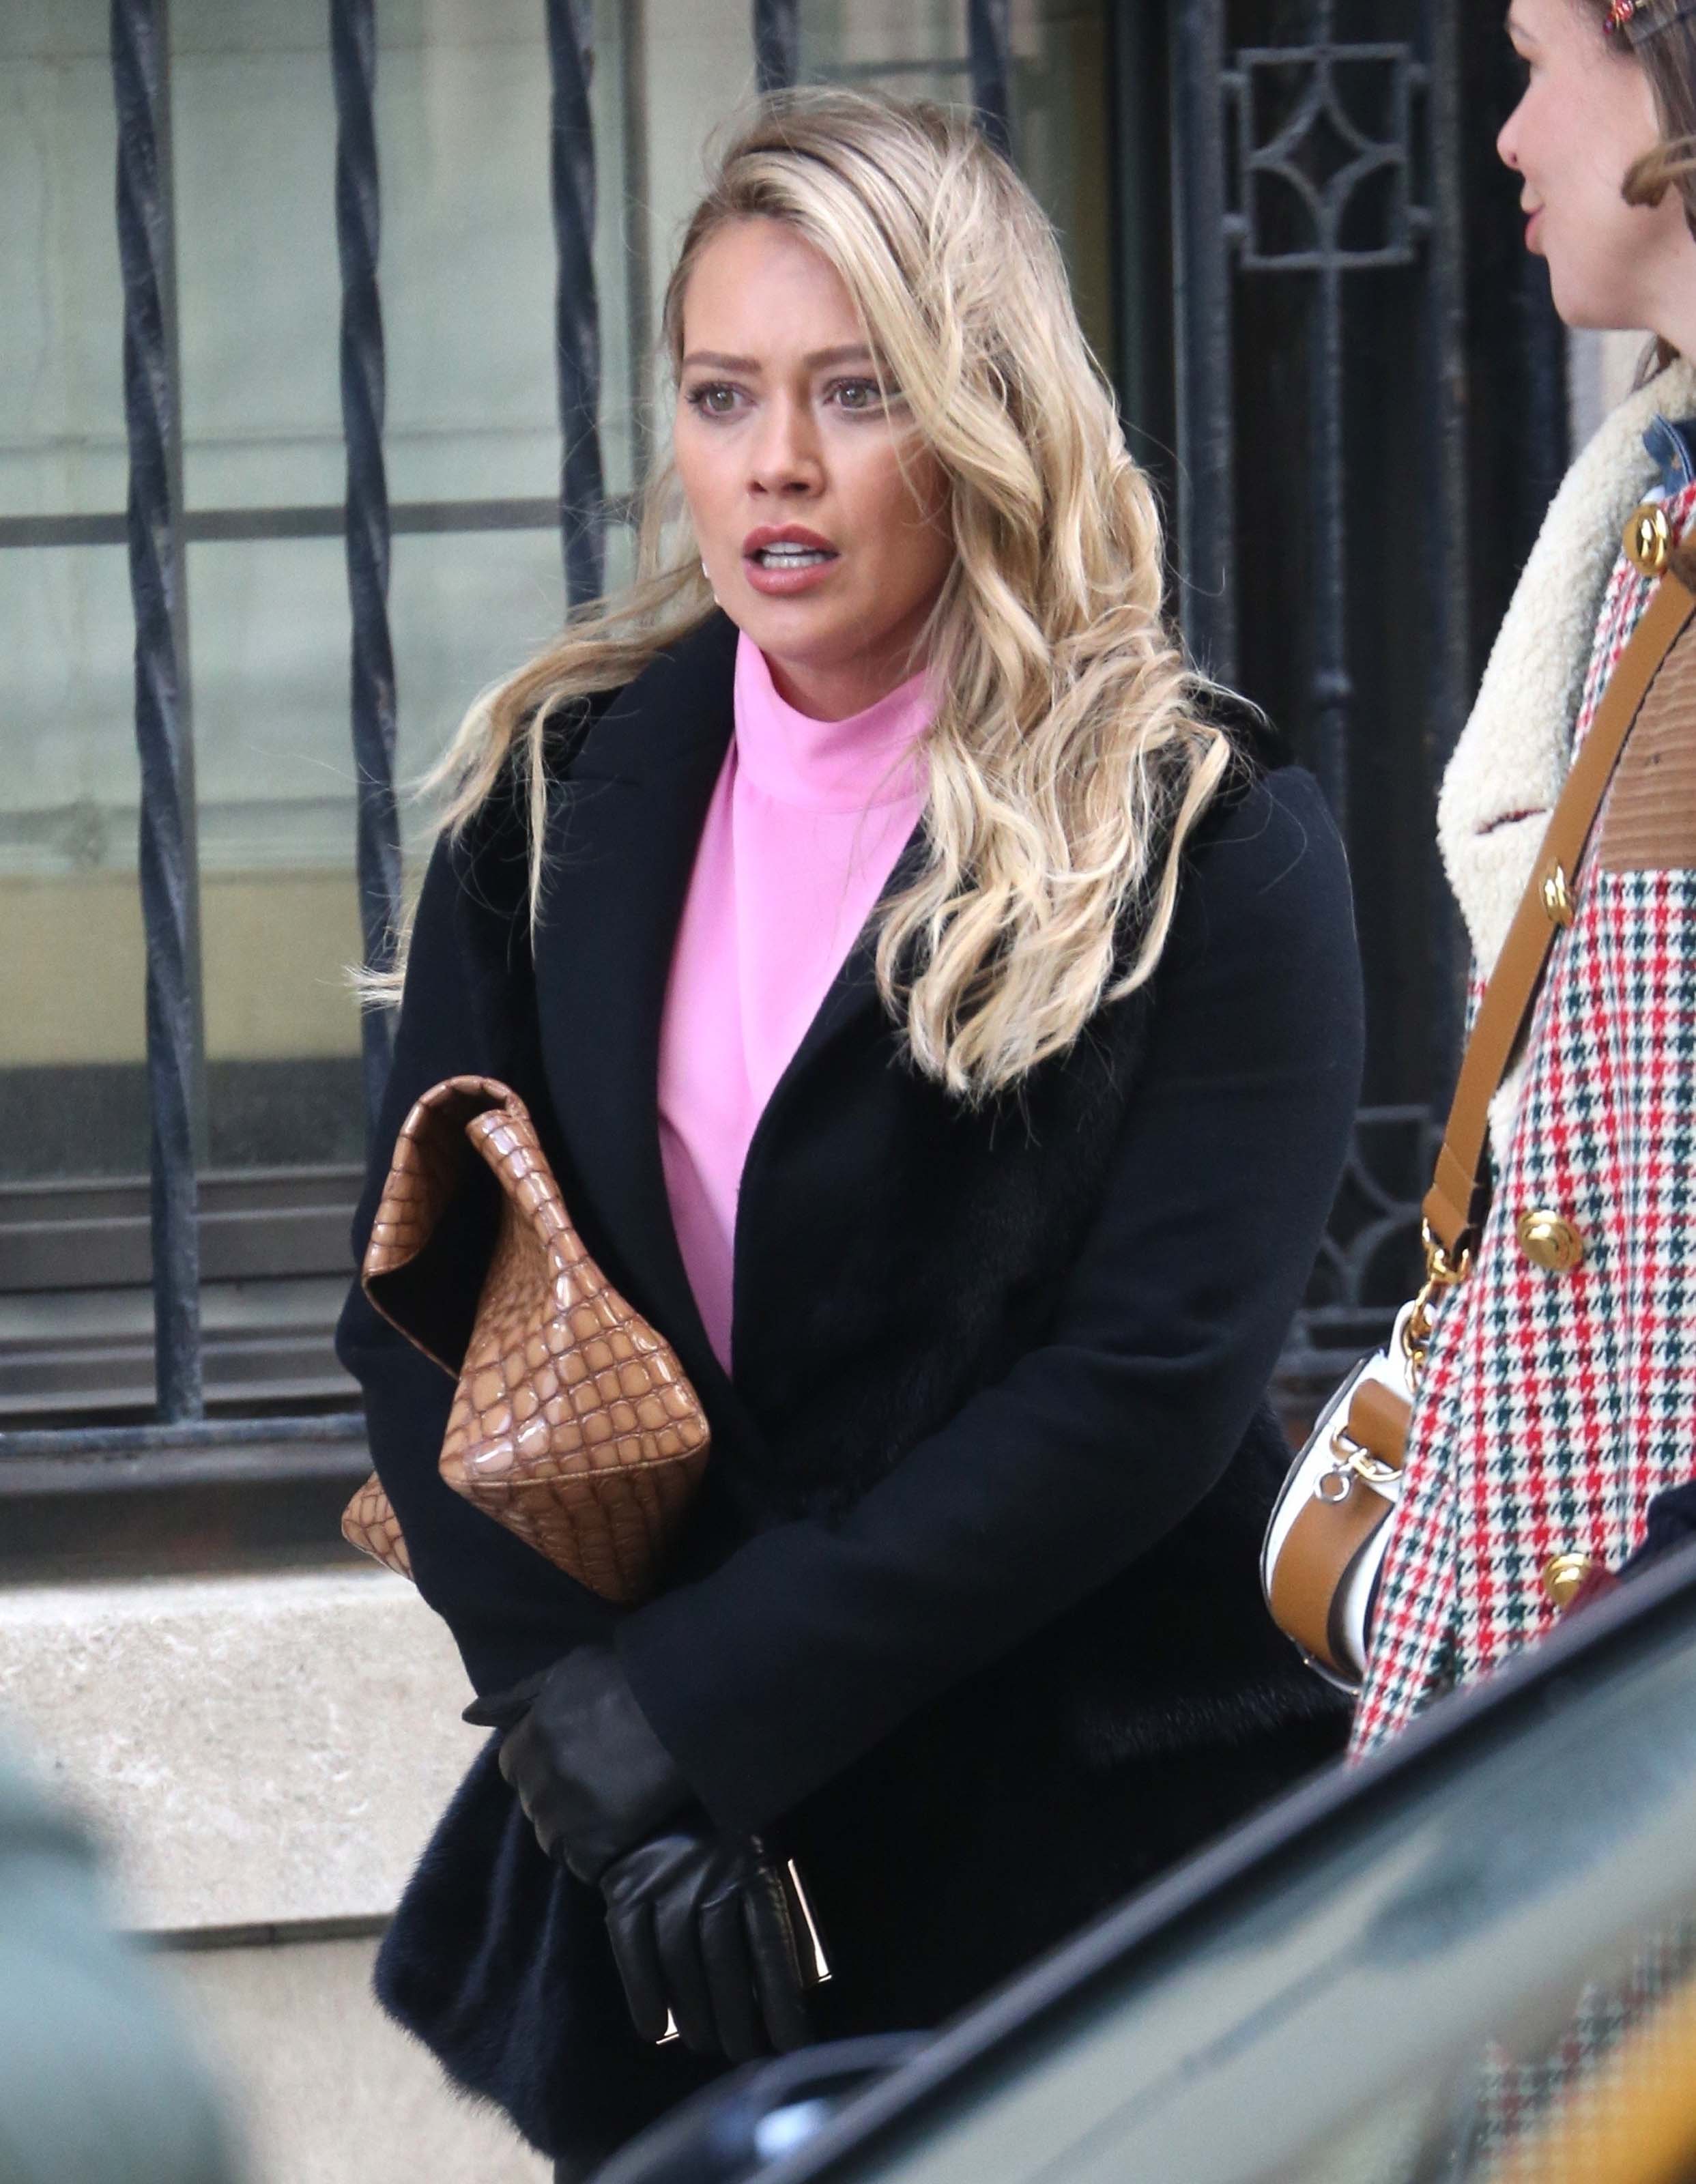 Hilary Duff filming Younger in Brooklyn